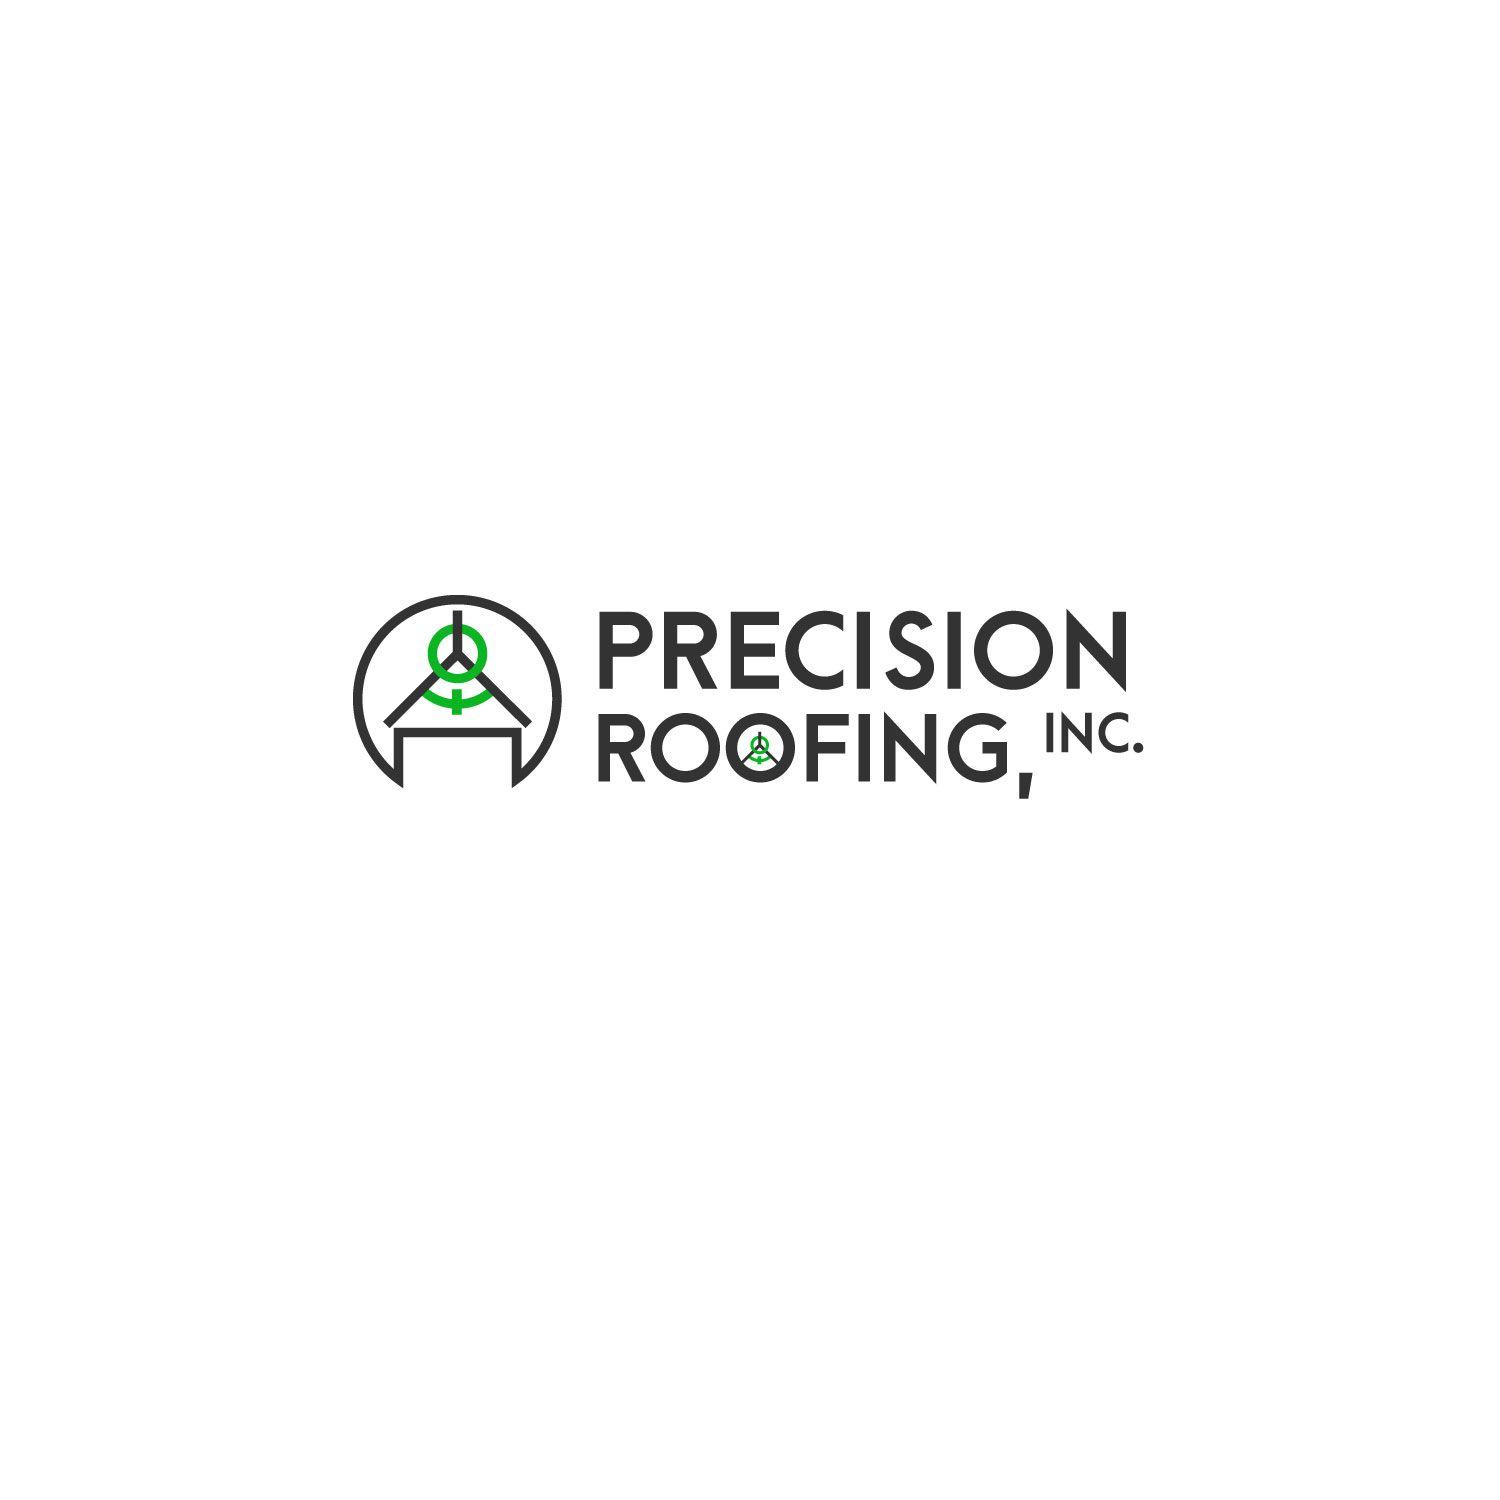 Precision Logo - Modern, Professional, Roofing Logo Design for Precision Roofing, Inc ...